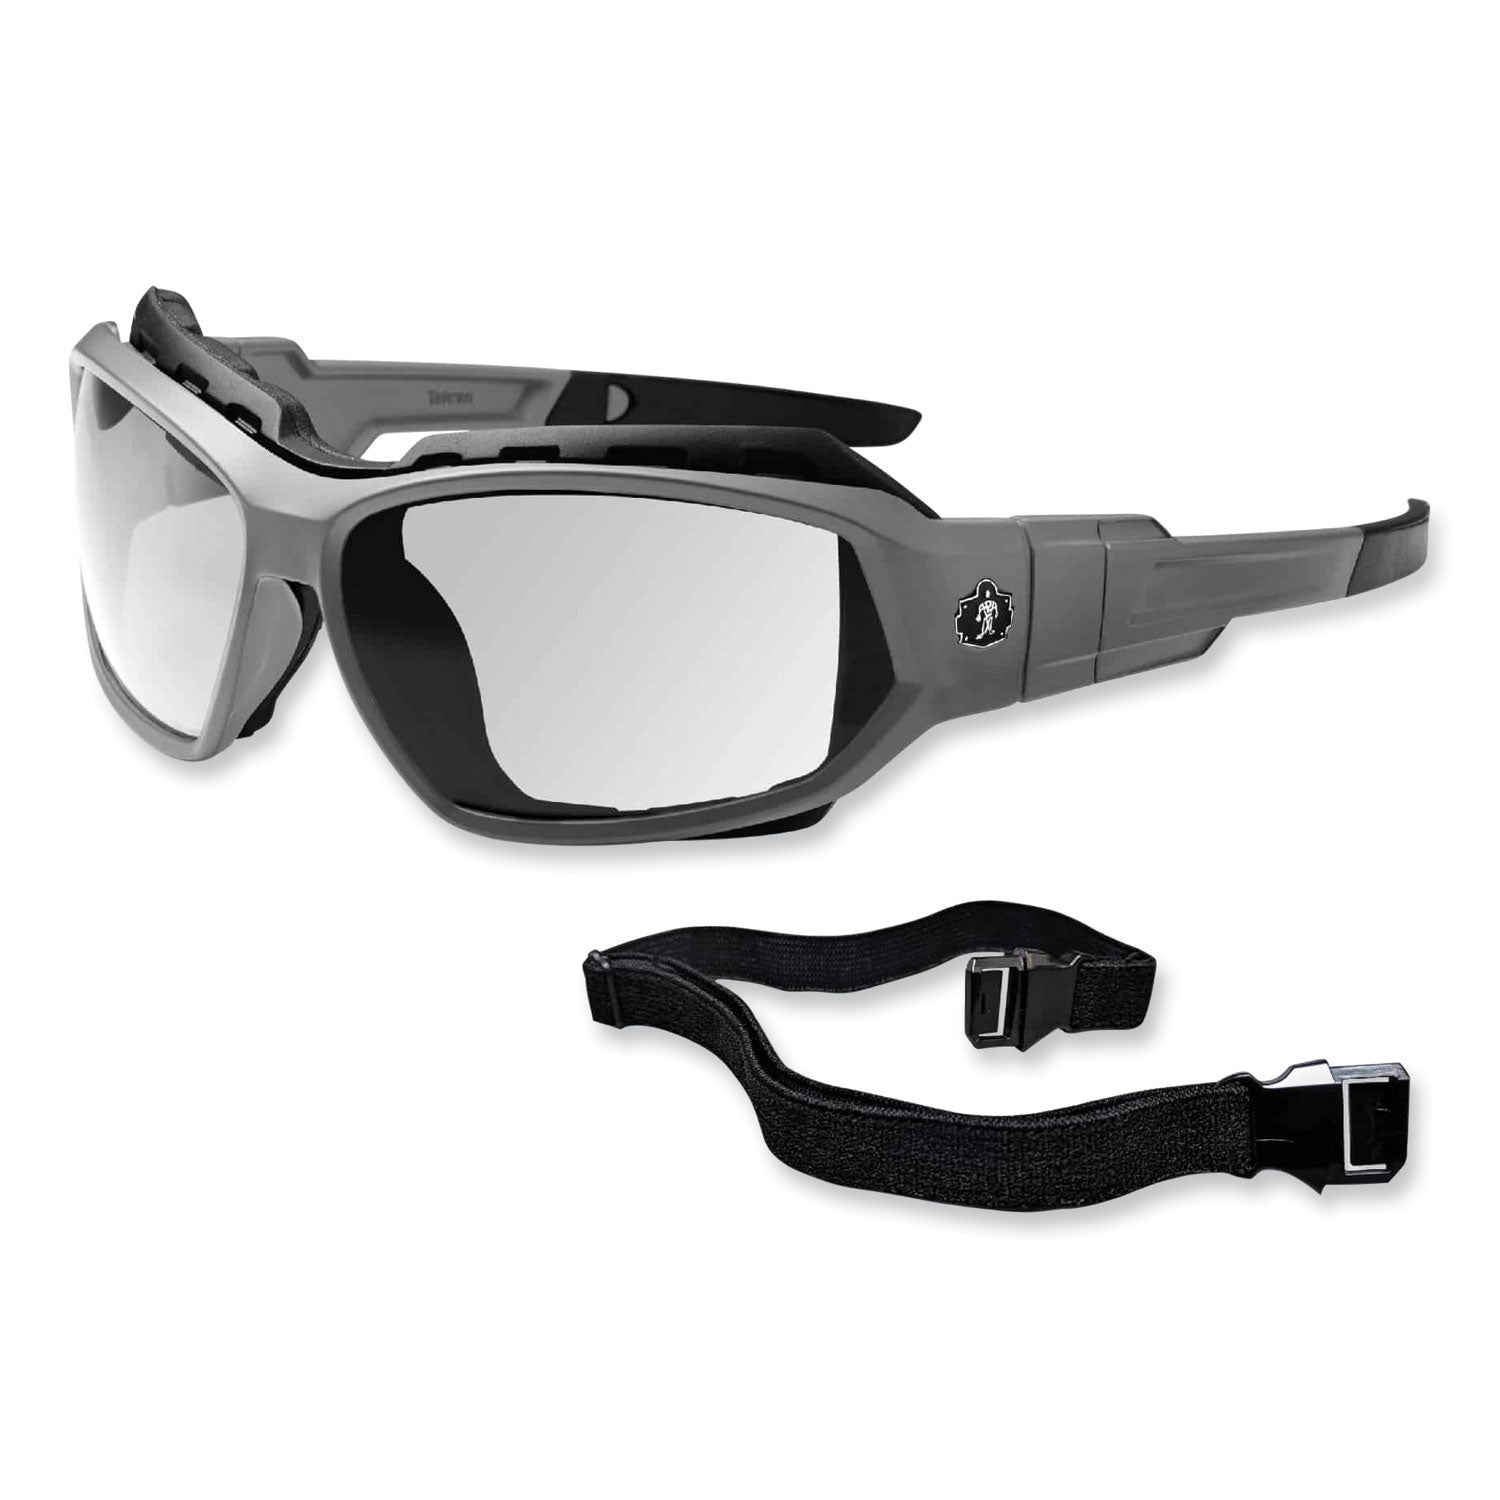 skullerz-loki-safety-glasses-goggles-matte-gray-nylon-impact-frame-anti-fog-clear-polycarb-lens-ships-in-1-3-business-days_ego56103 - 4